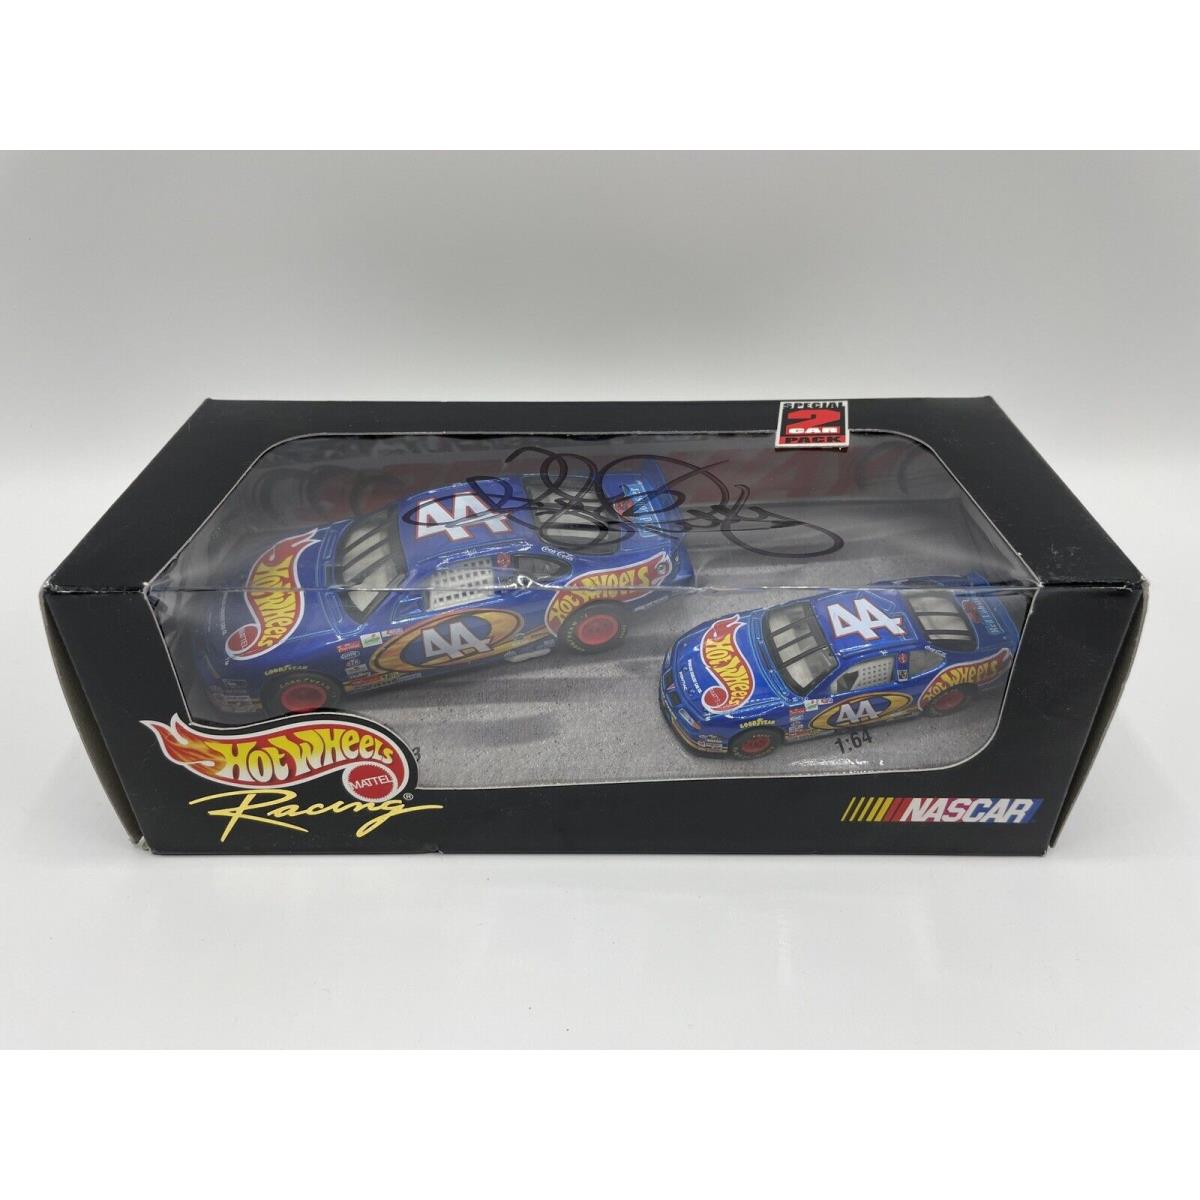 Hot Wheels Racing Nascar Special 2 Car Pack Kyle Petty 44 1:43/1:64 Autographed